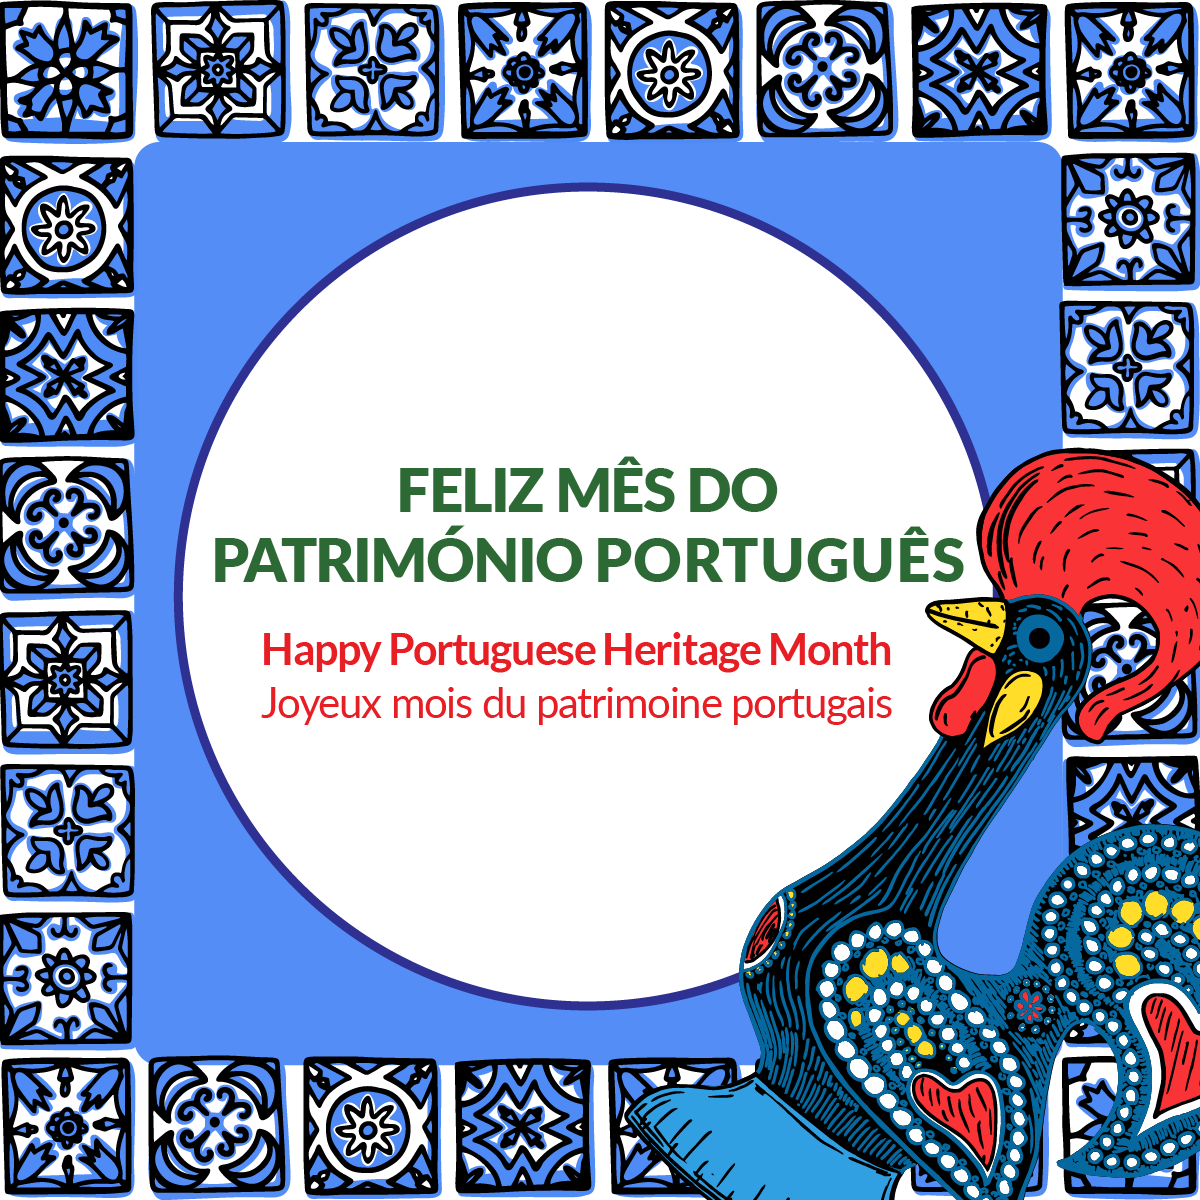 Portuguese Heritage Month